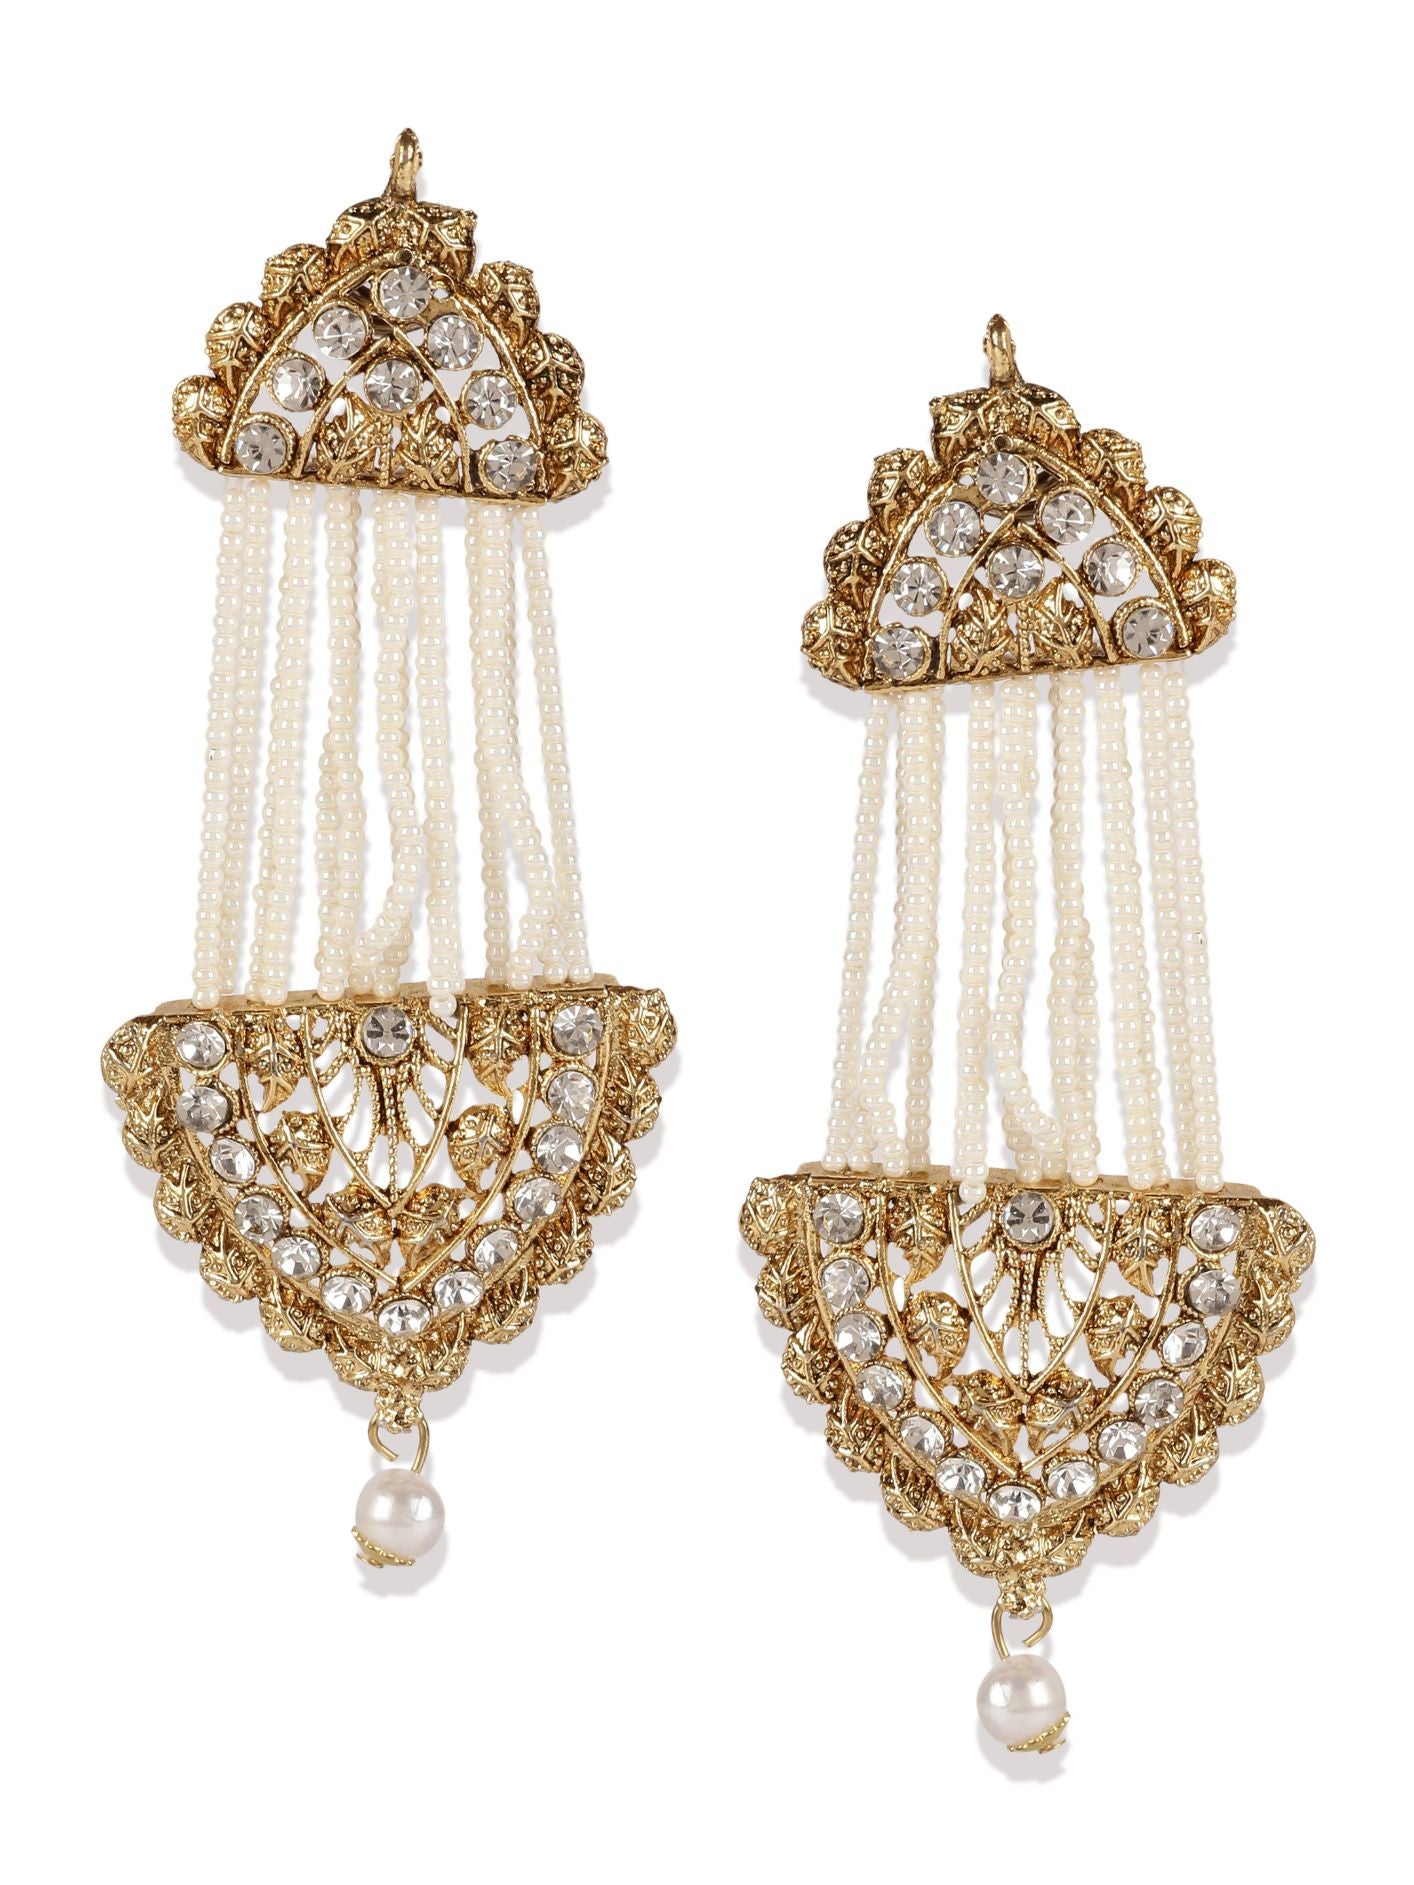 Women's White & Gold-Plated Handcrafted Kundan Pearl Studded Multistrand Earrings - Anikas Creation